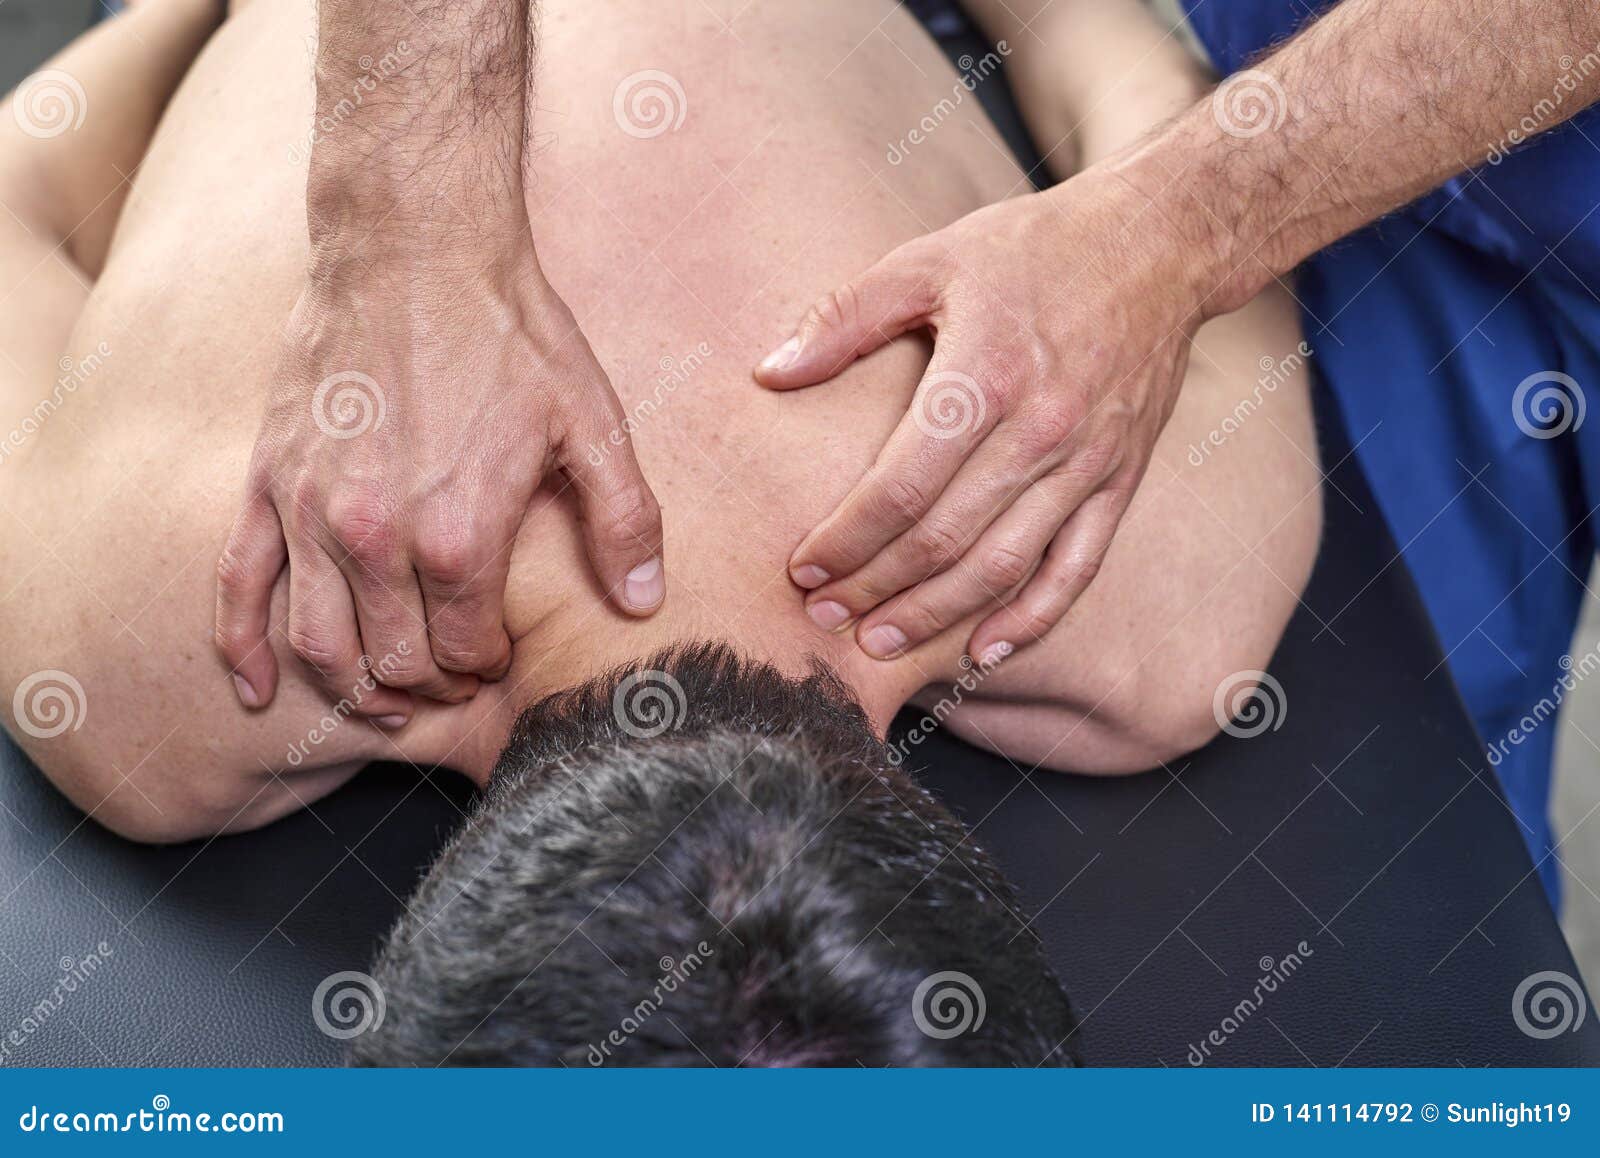 physiotherapist giving a back massage. chiropractic, osteopathy, manual therapy, acupressure